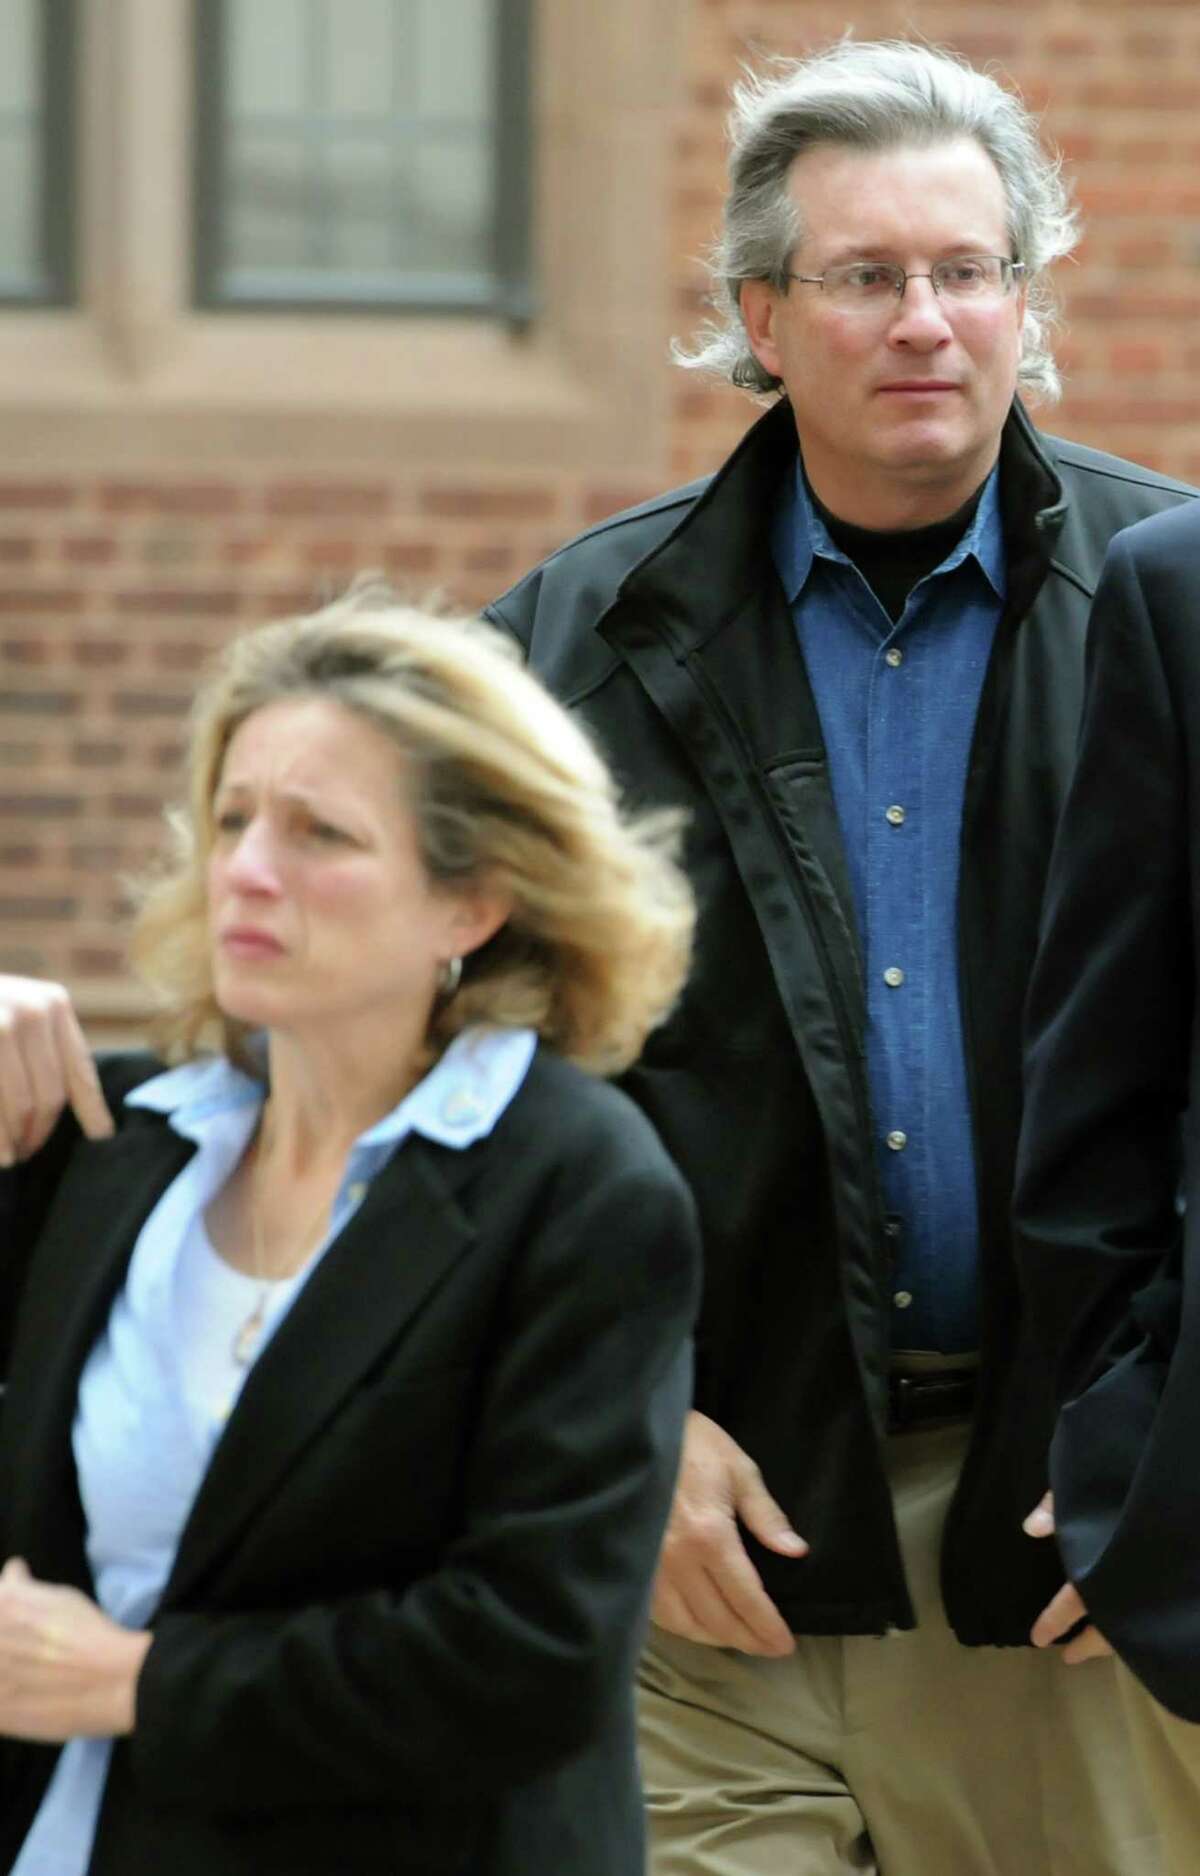 New Haven--Dr. William Petit Jr. right and his sister Johanna Chapman left arrive at New Haven Superior Court on Saturday. The jury continued its deliberations to reach a sentencing verdict in the Steven Hayes trial. Photo by Mara Lavitt/New Haven Register 11/6/10